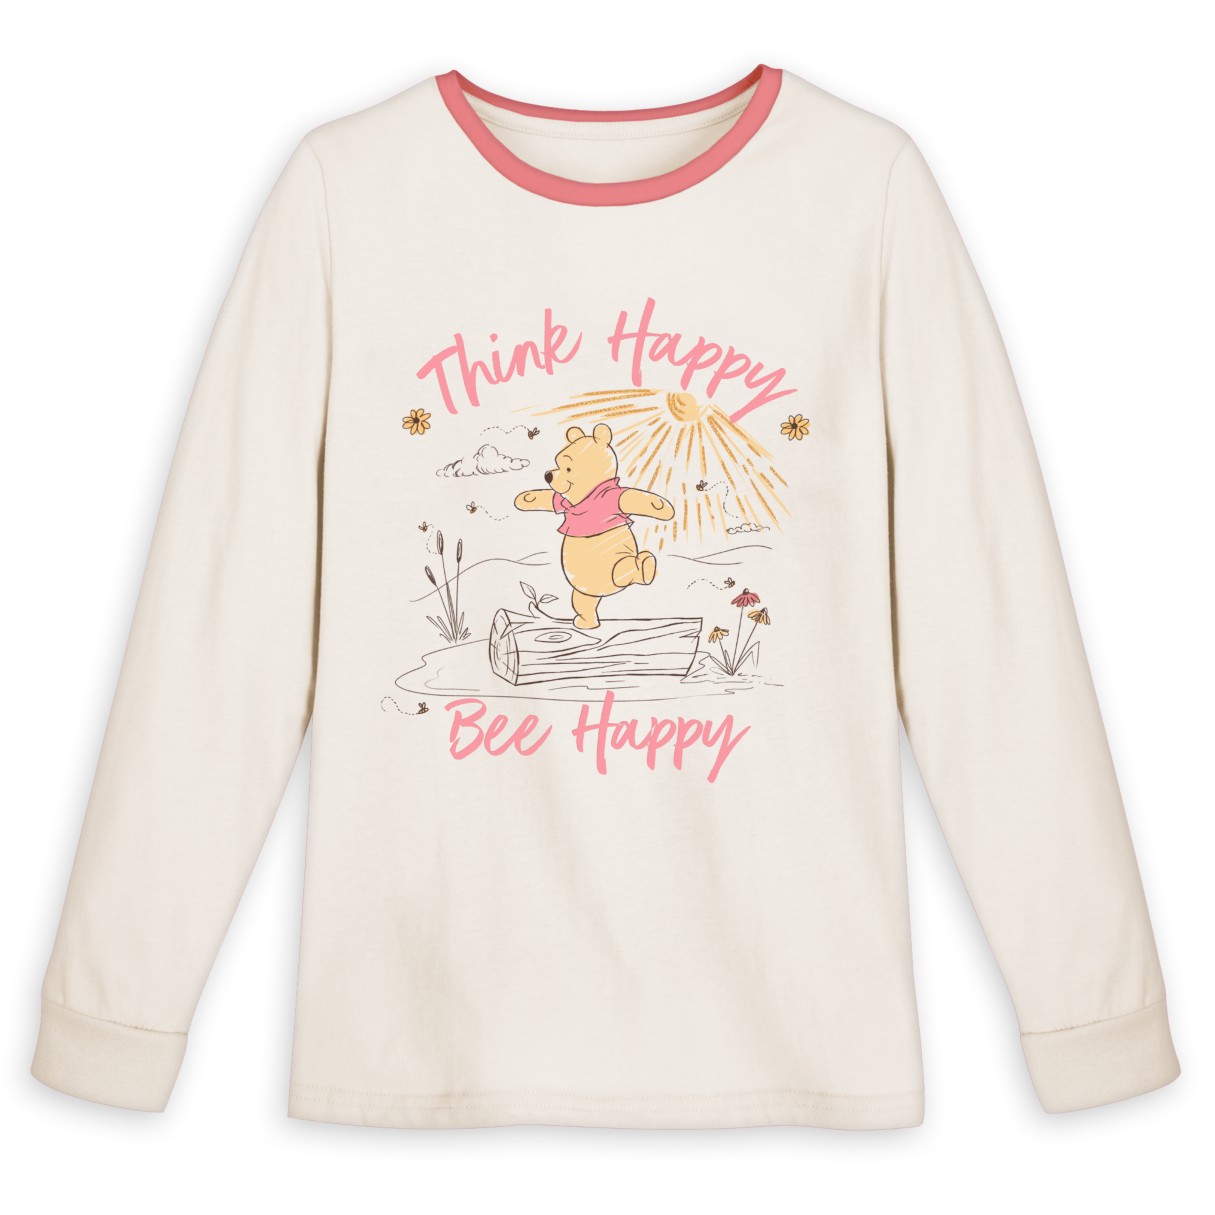 Winnie the Pooh Long Sleeve T-Shirt for Women